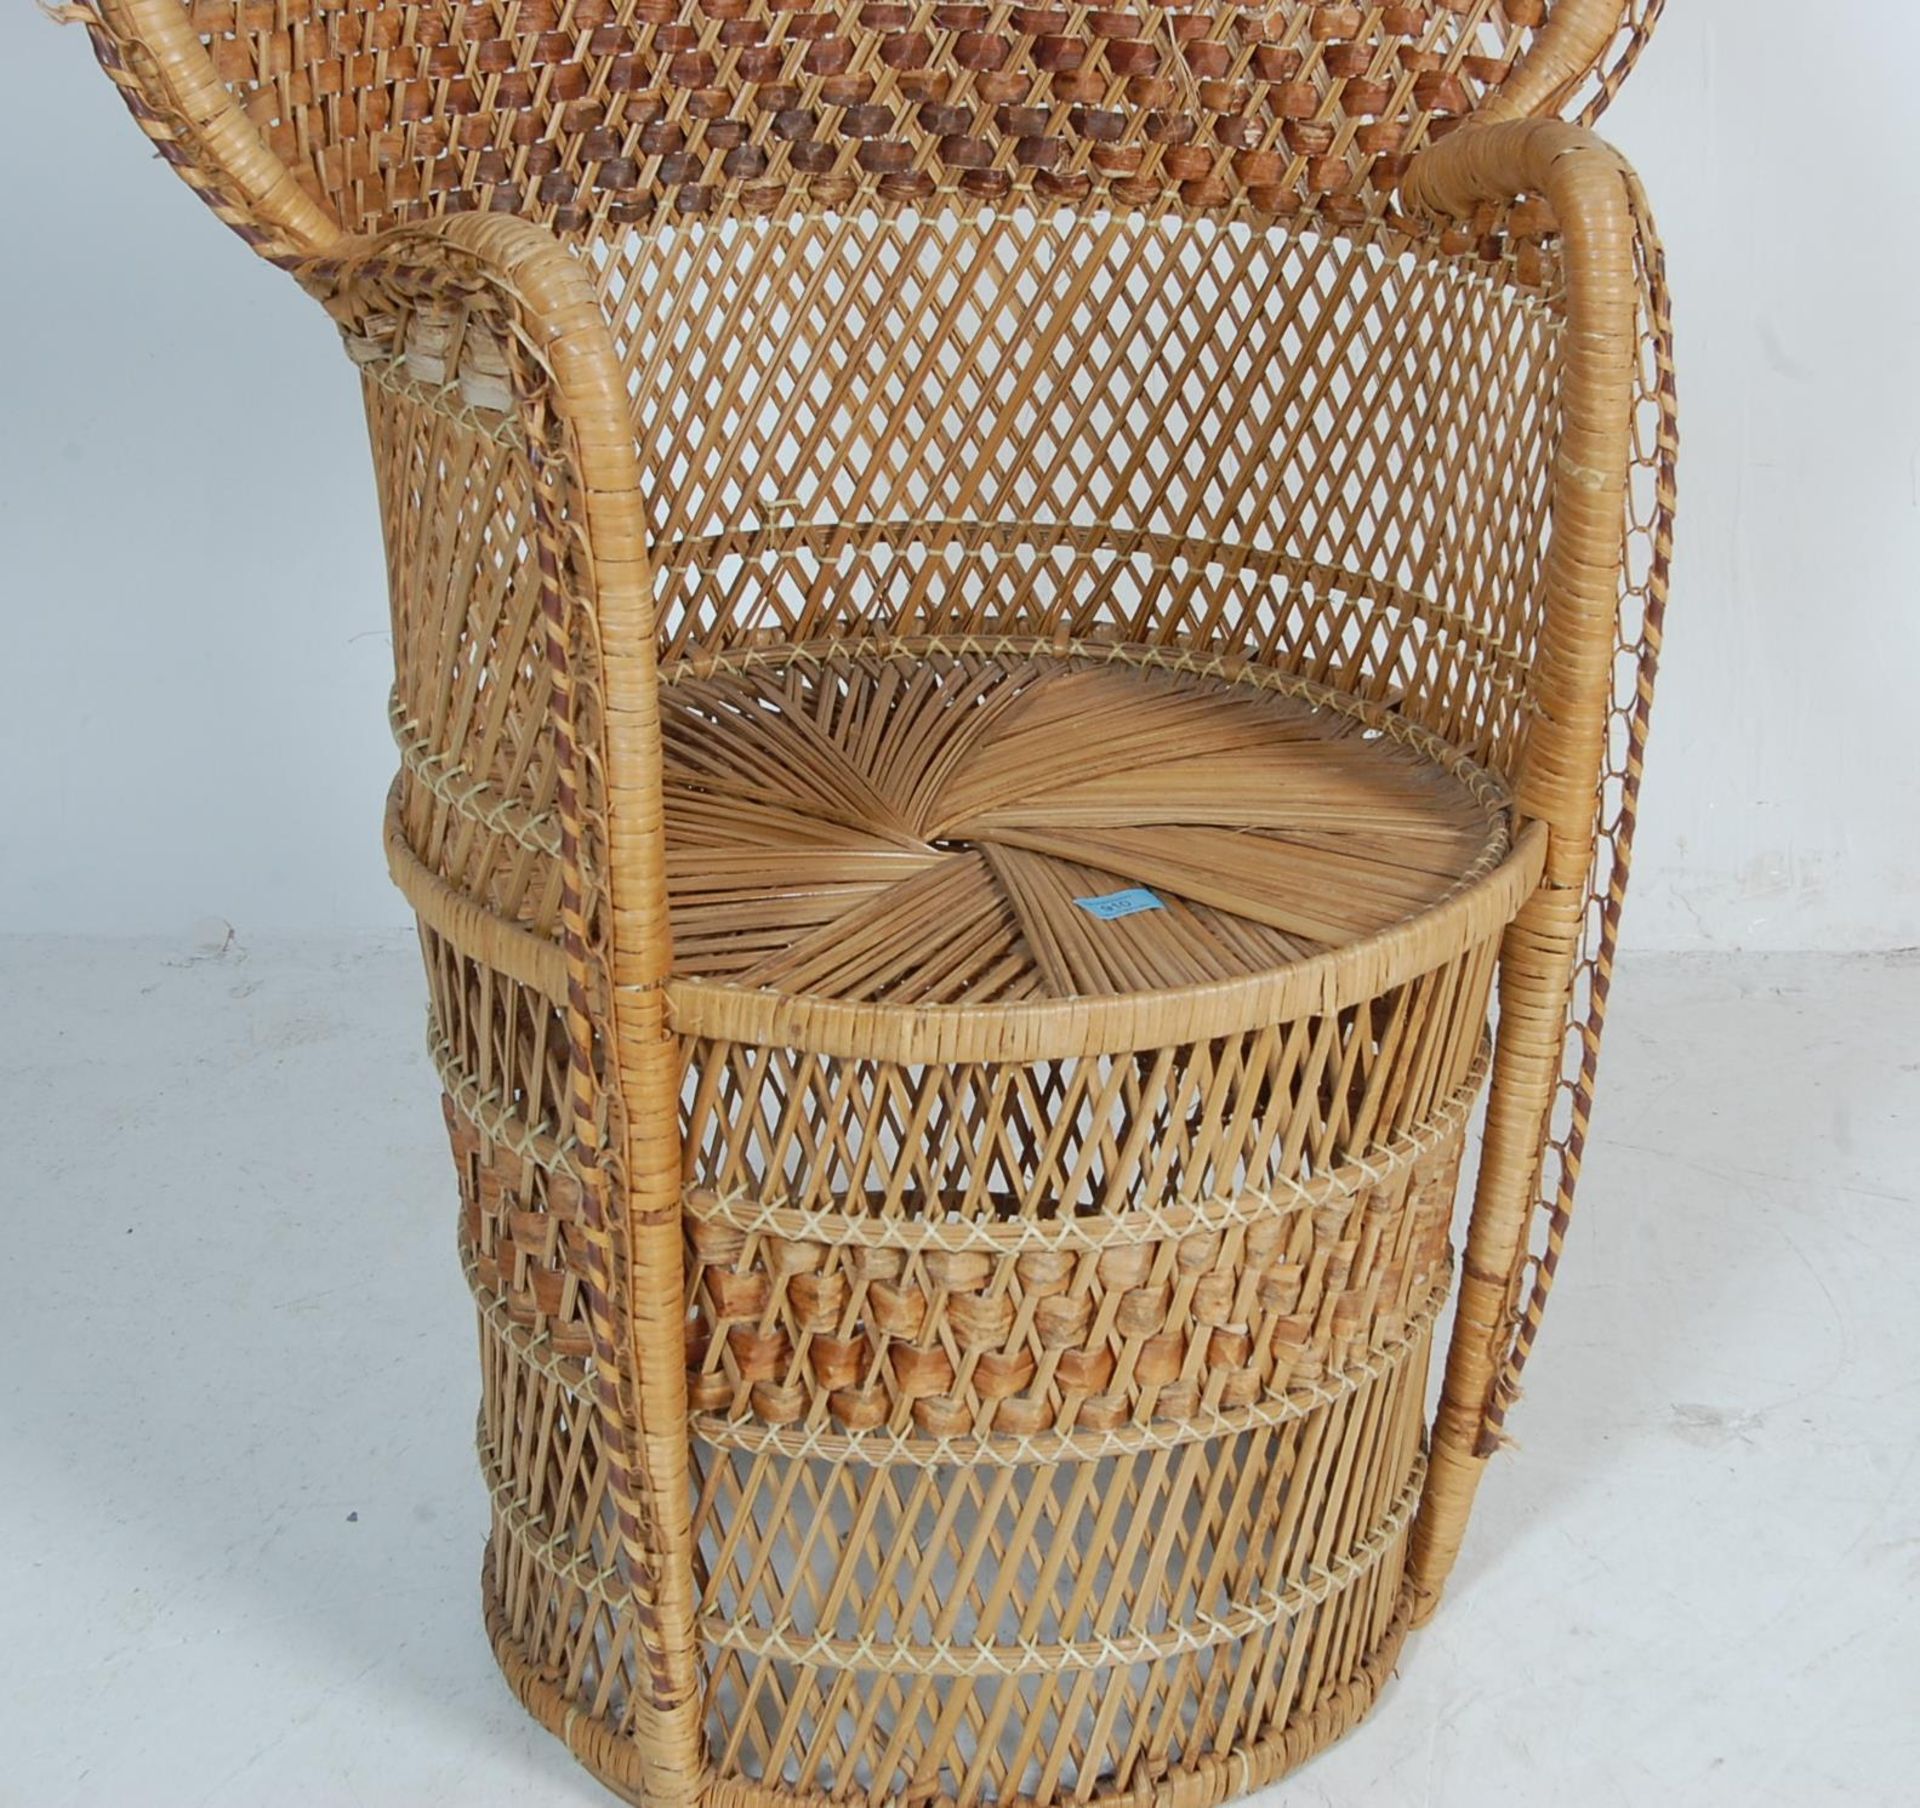 VINTAGE RETRO WICKER CONSERVATORY CHAIR - Image 2 of 6